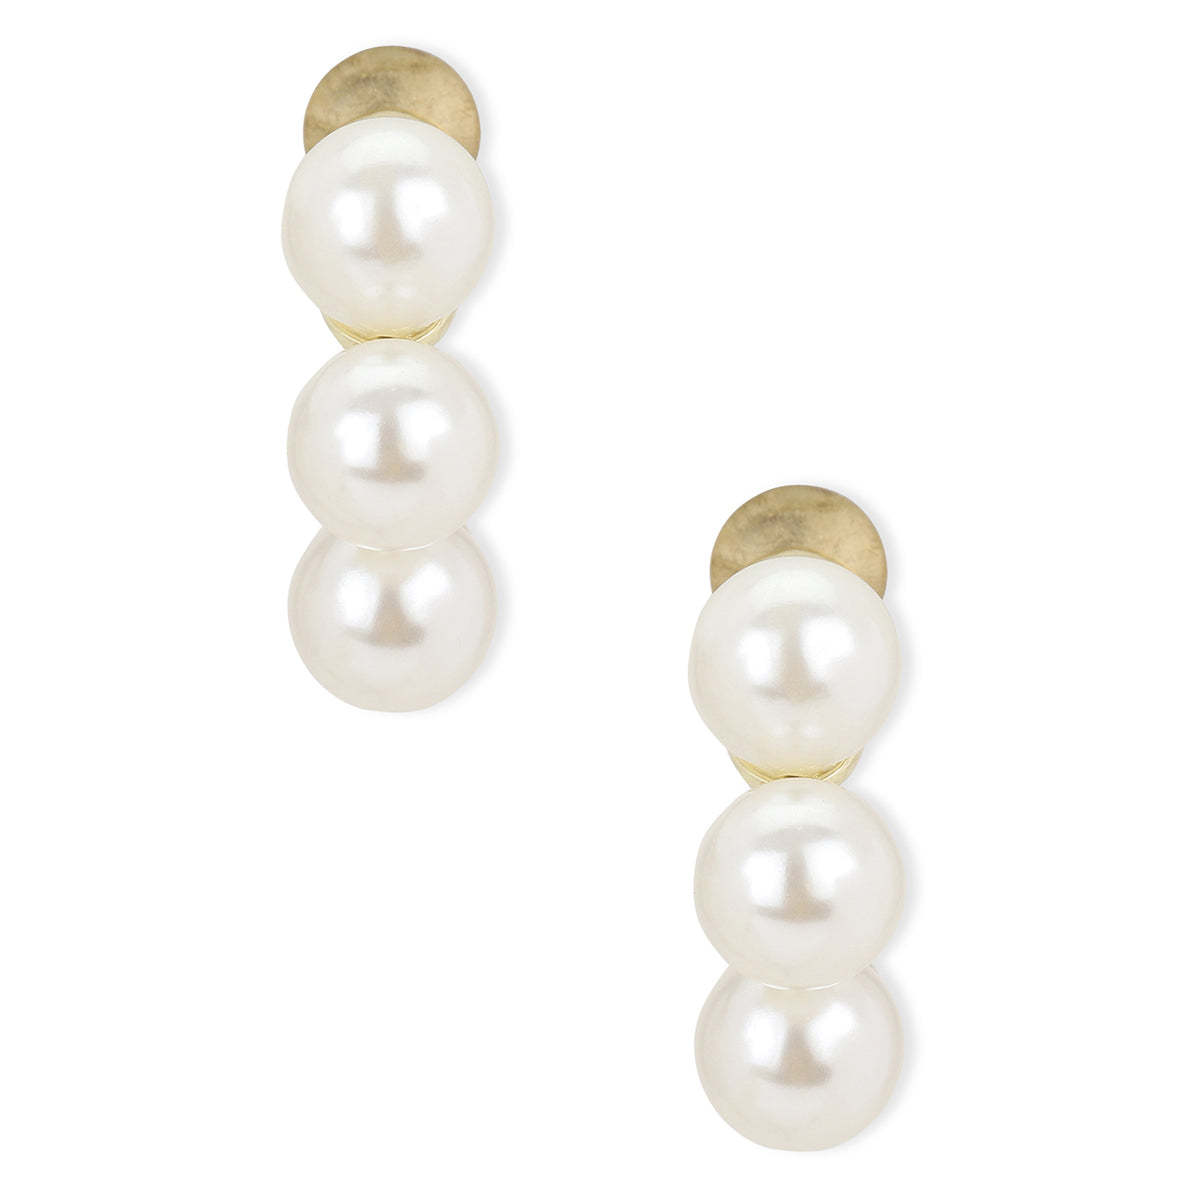 Gold-Toned & White Contemporary Drop Earrings